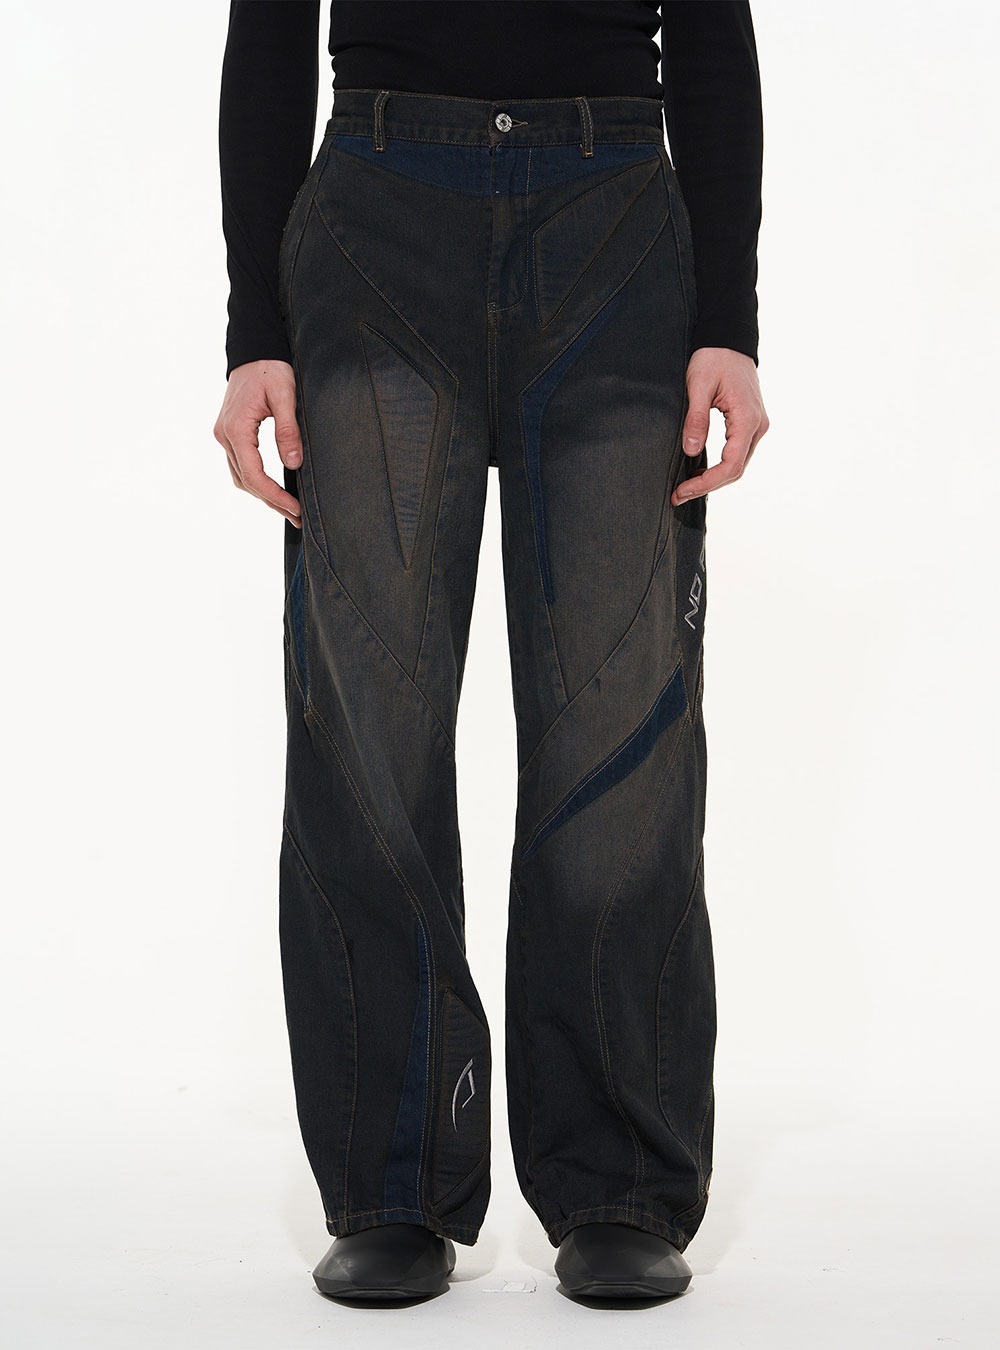 [BLIND NO PLAN] Heavy Embroidery 3D Stitch Washing Jeans